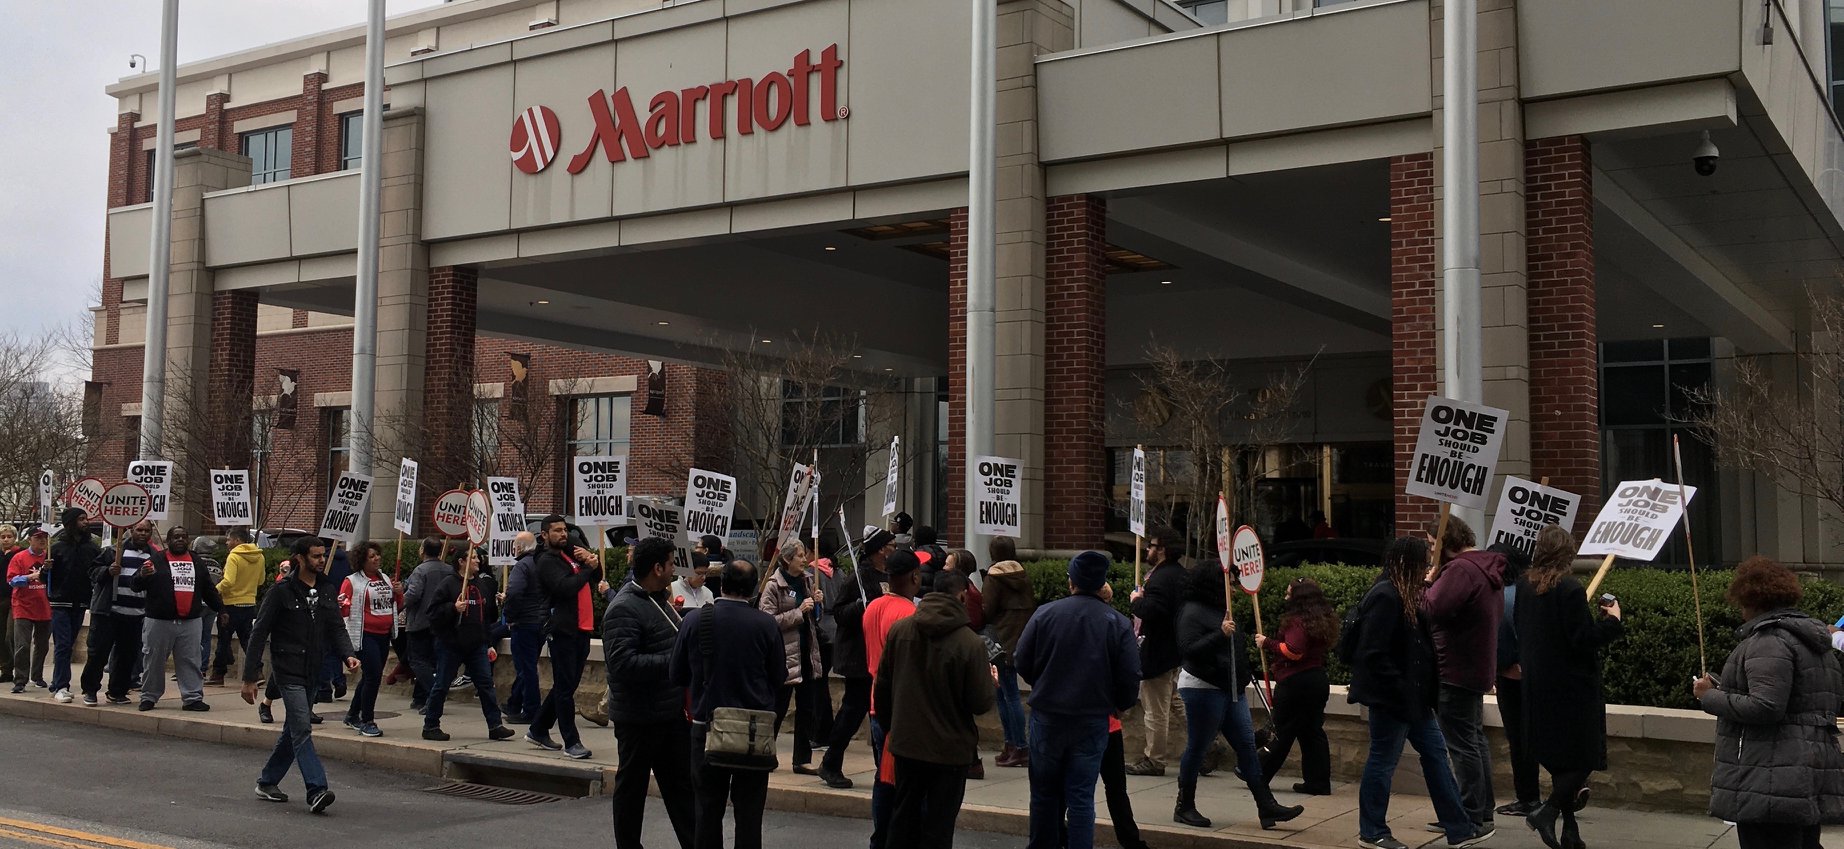 "Being an activist trustee can make a difference": Trustees push UBS to hold Marriott accountable on workers' rights in Baltimore